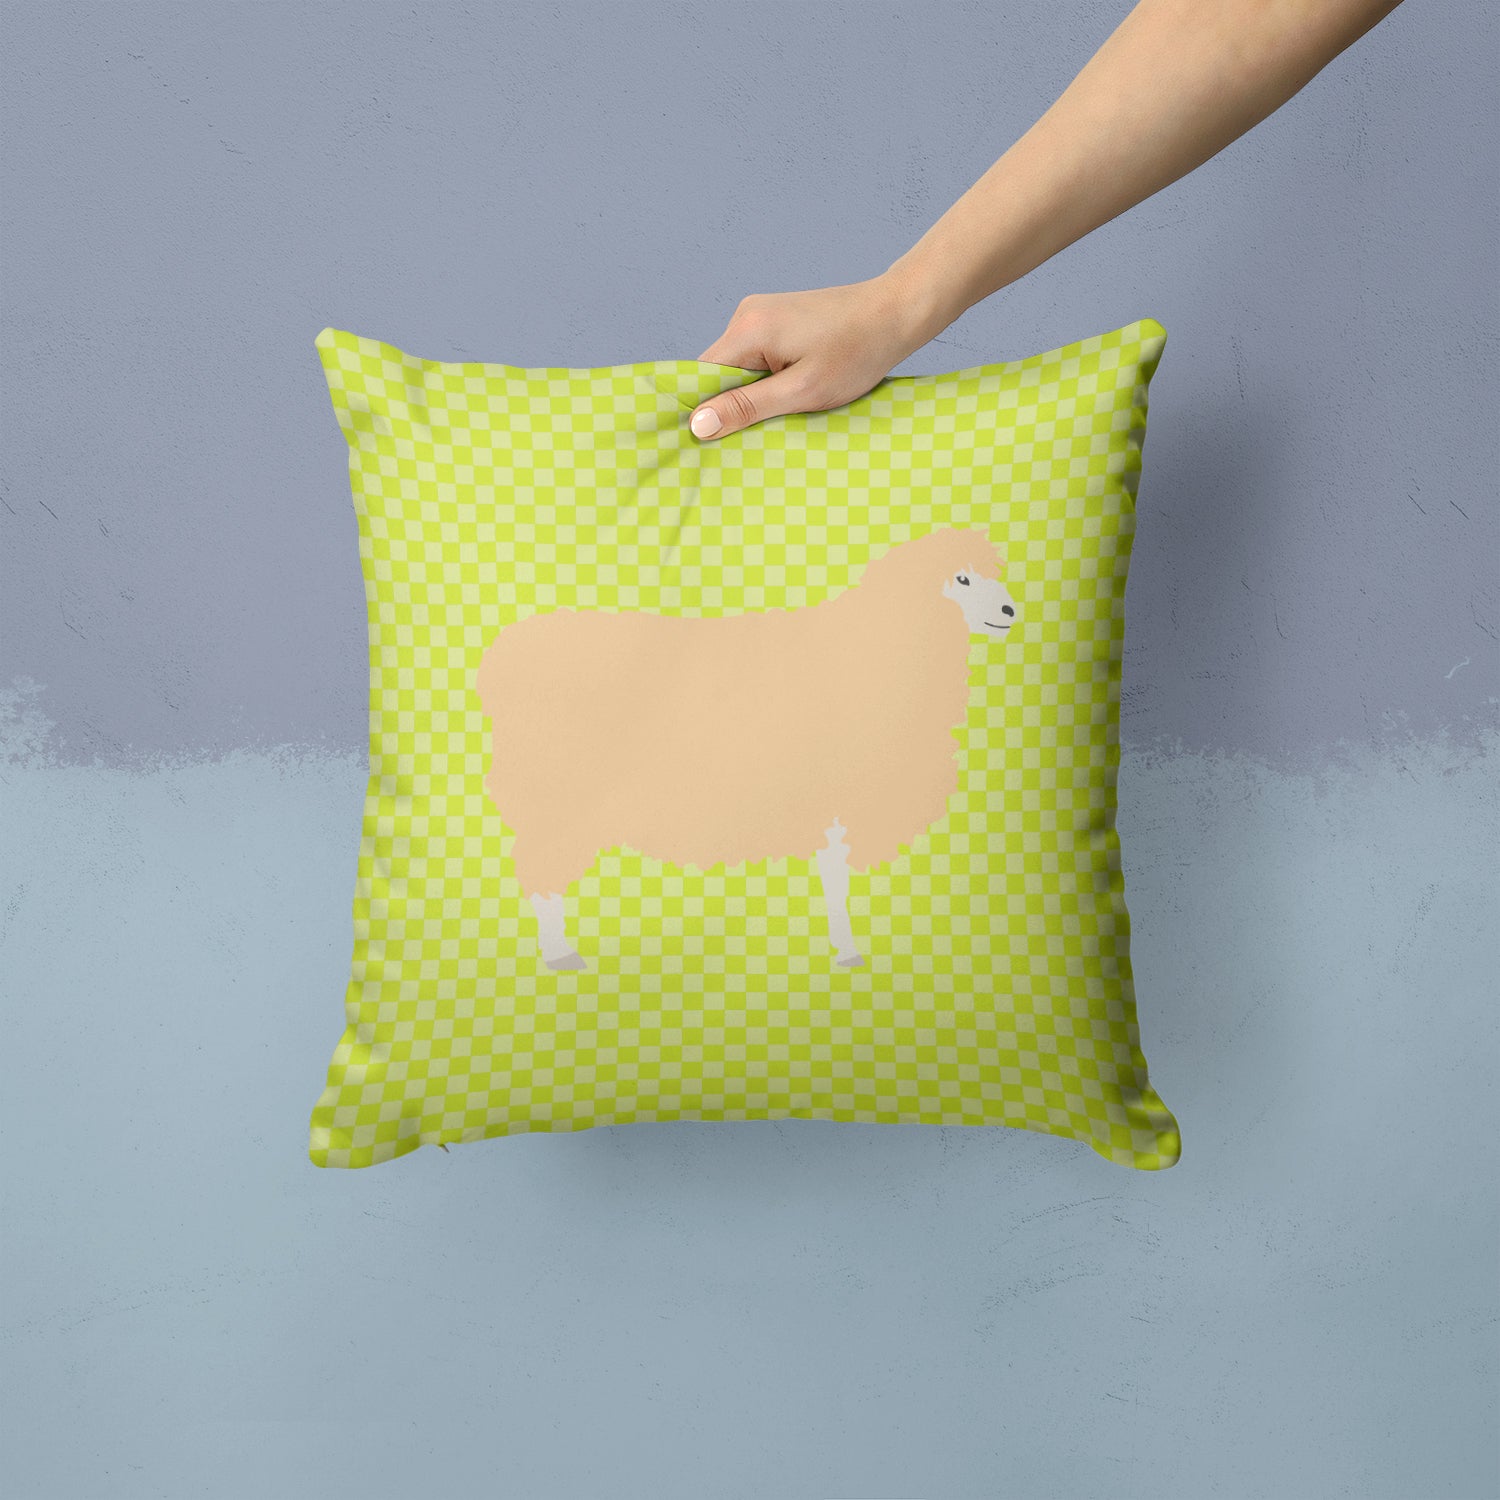 English Leicester Longwool Sheep Green Fabric Decorative Pillow BB7800PW1414 - the-store.com